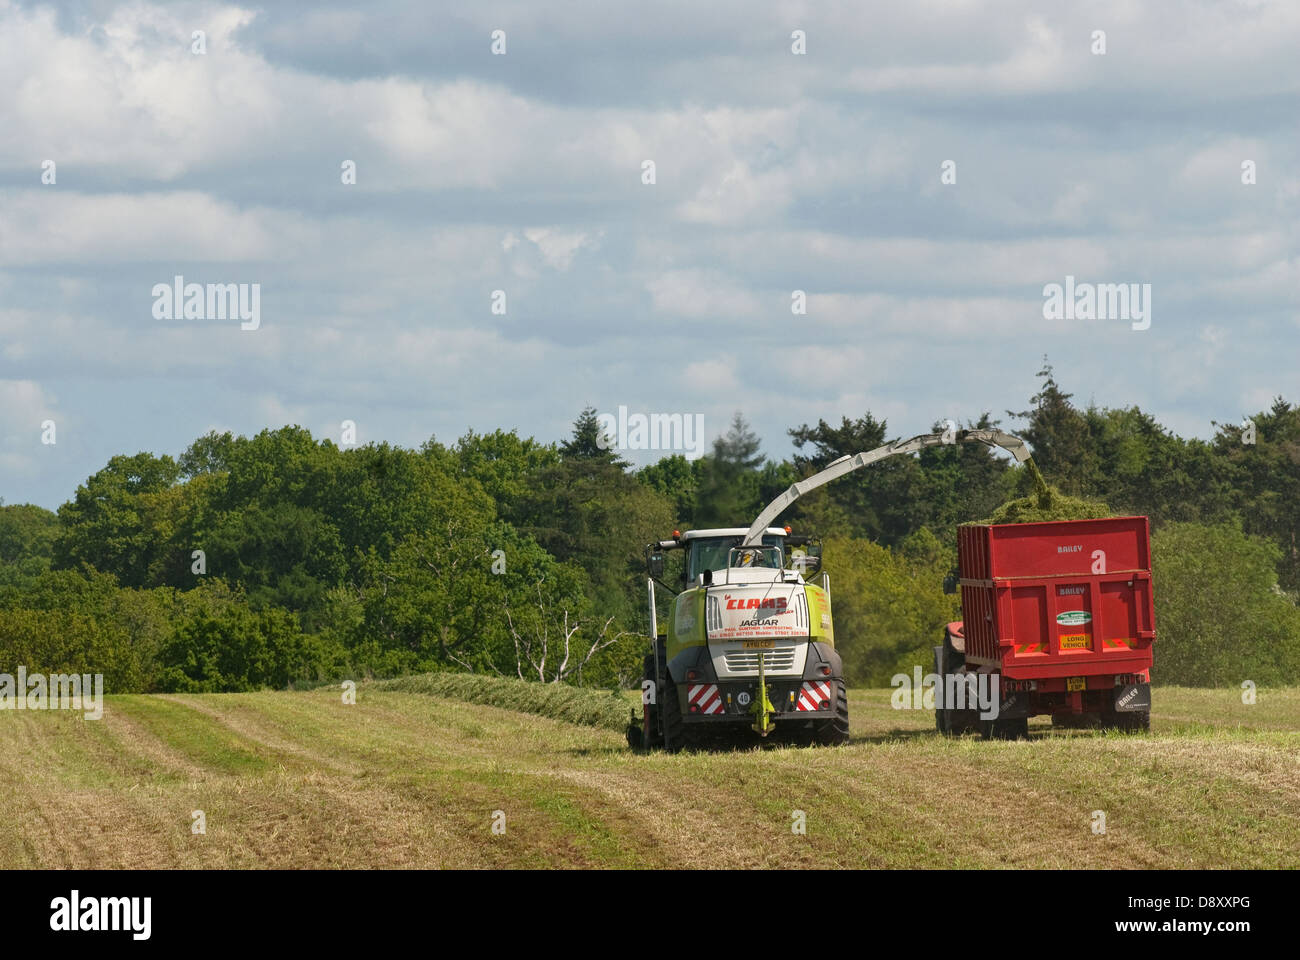 Harvesting grass for silage making for cattle feed Stock Photo